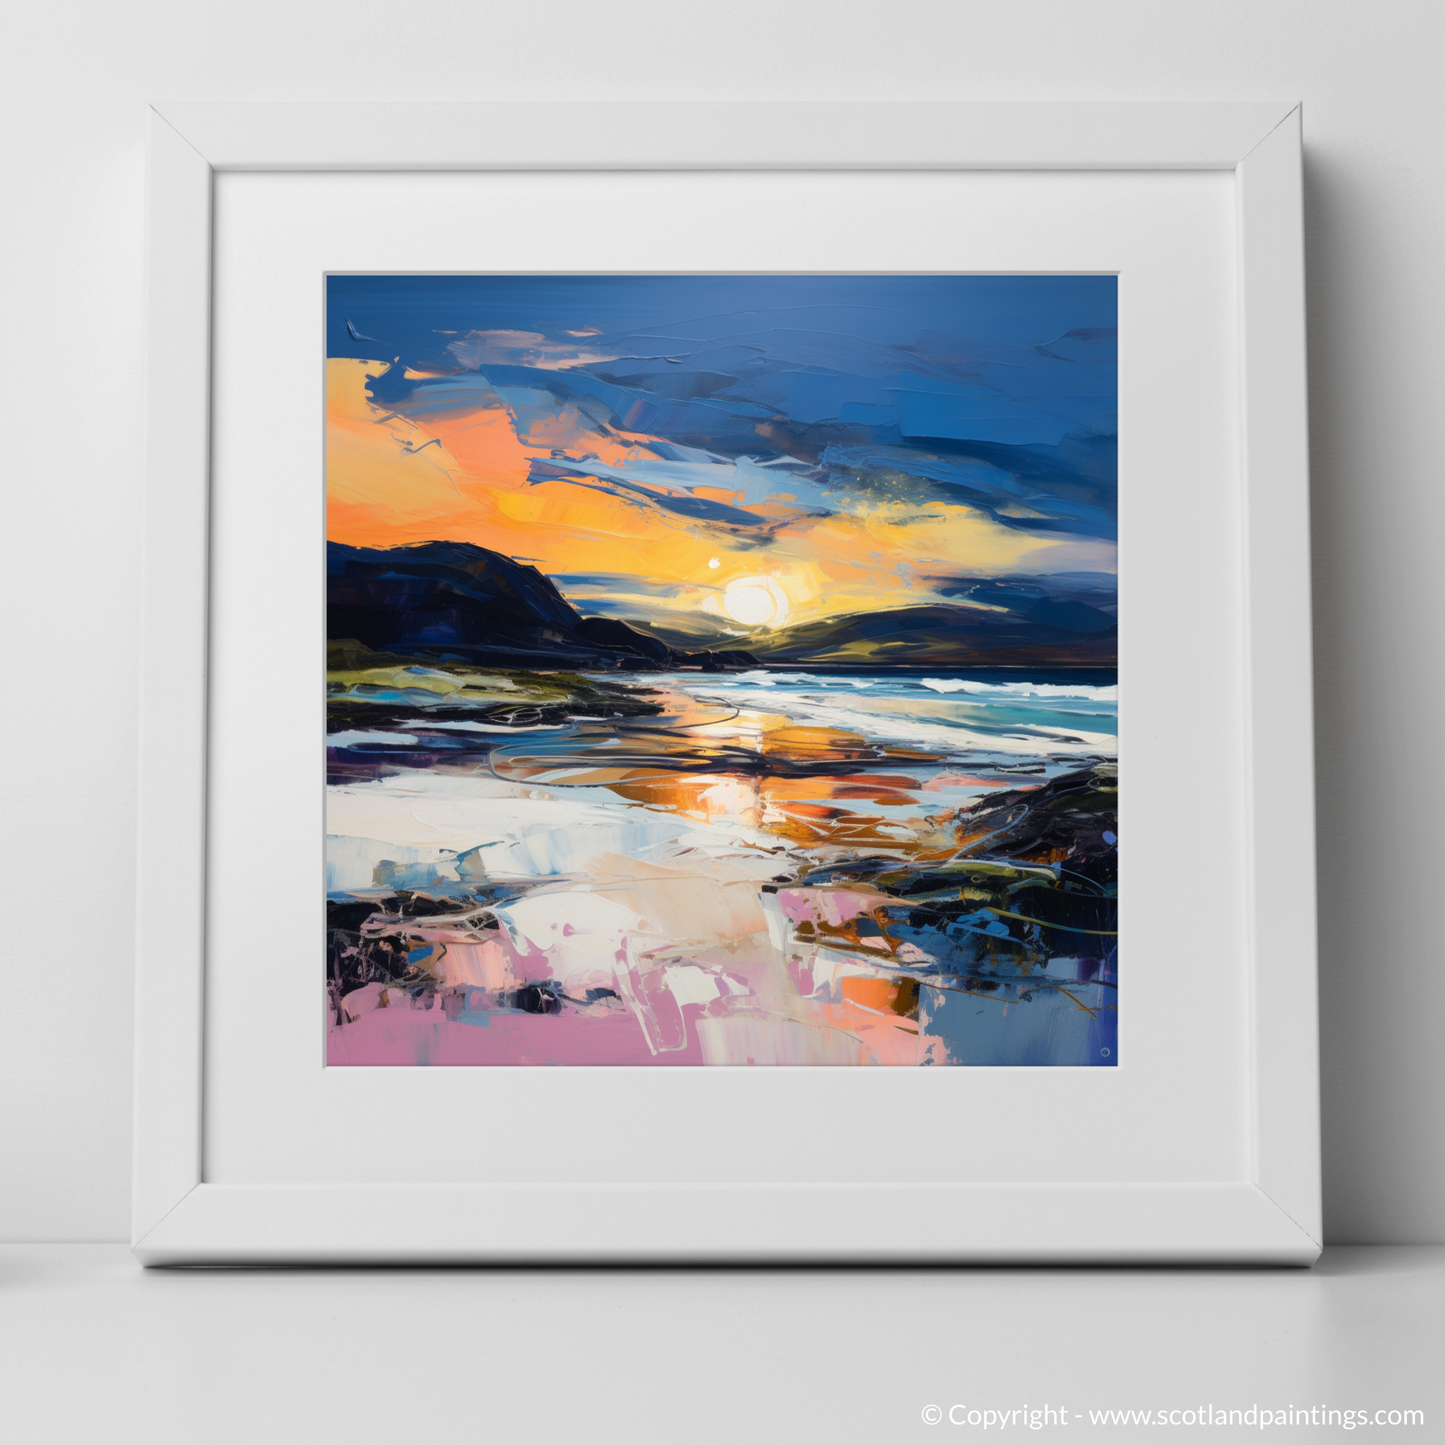 Art Print of Scarista Beach at dusk with a white frame